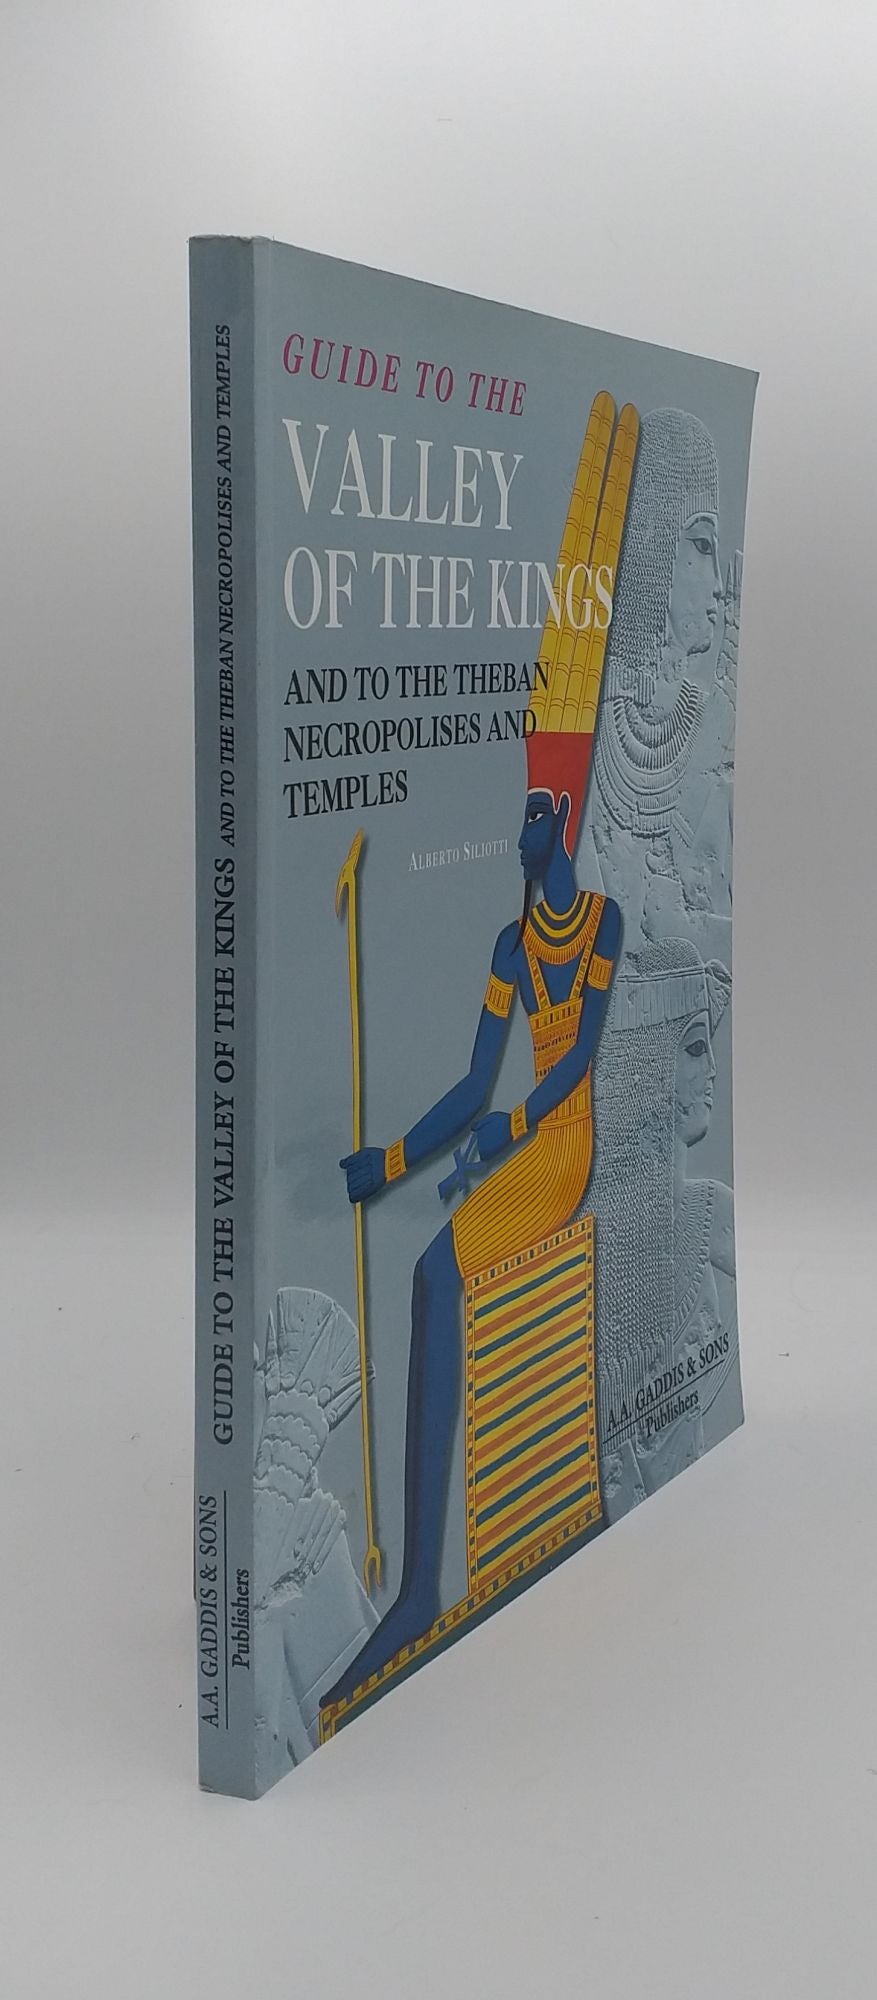 SILIOTTI Alberto - Guide to the Valley of the Kings and to the Theban Necropolises and Temples